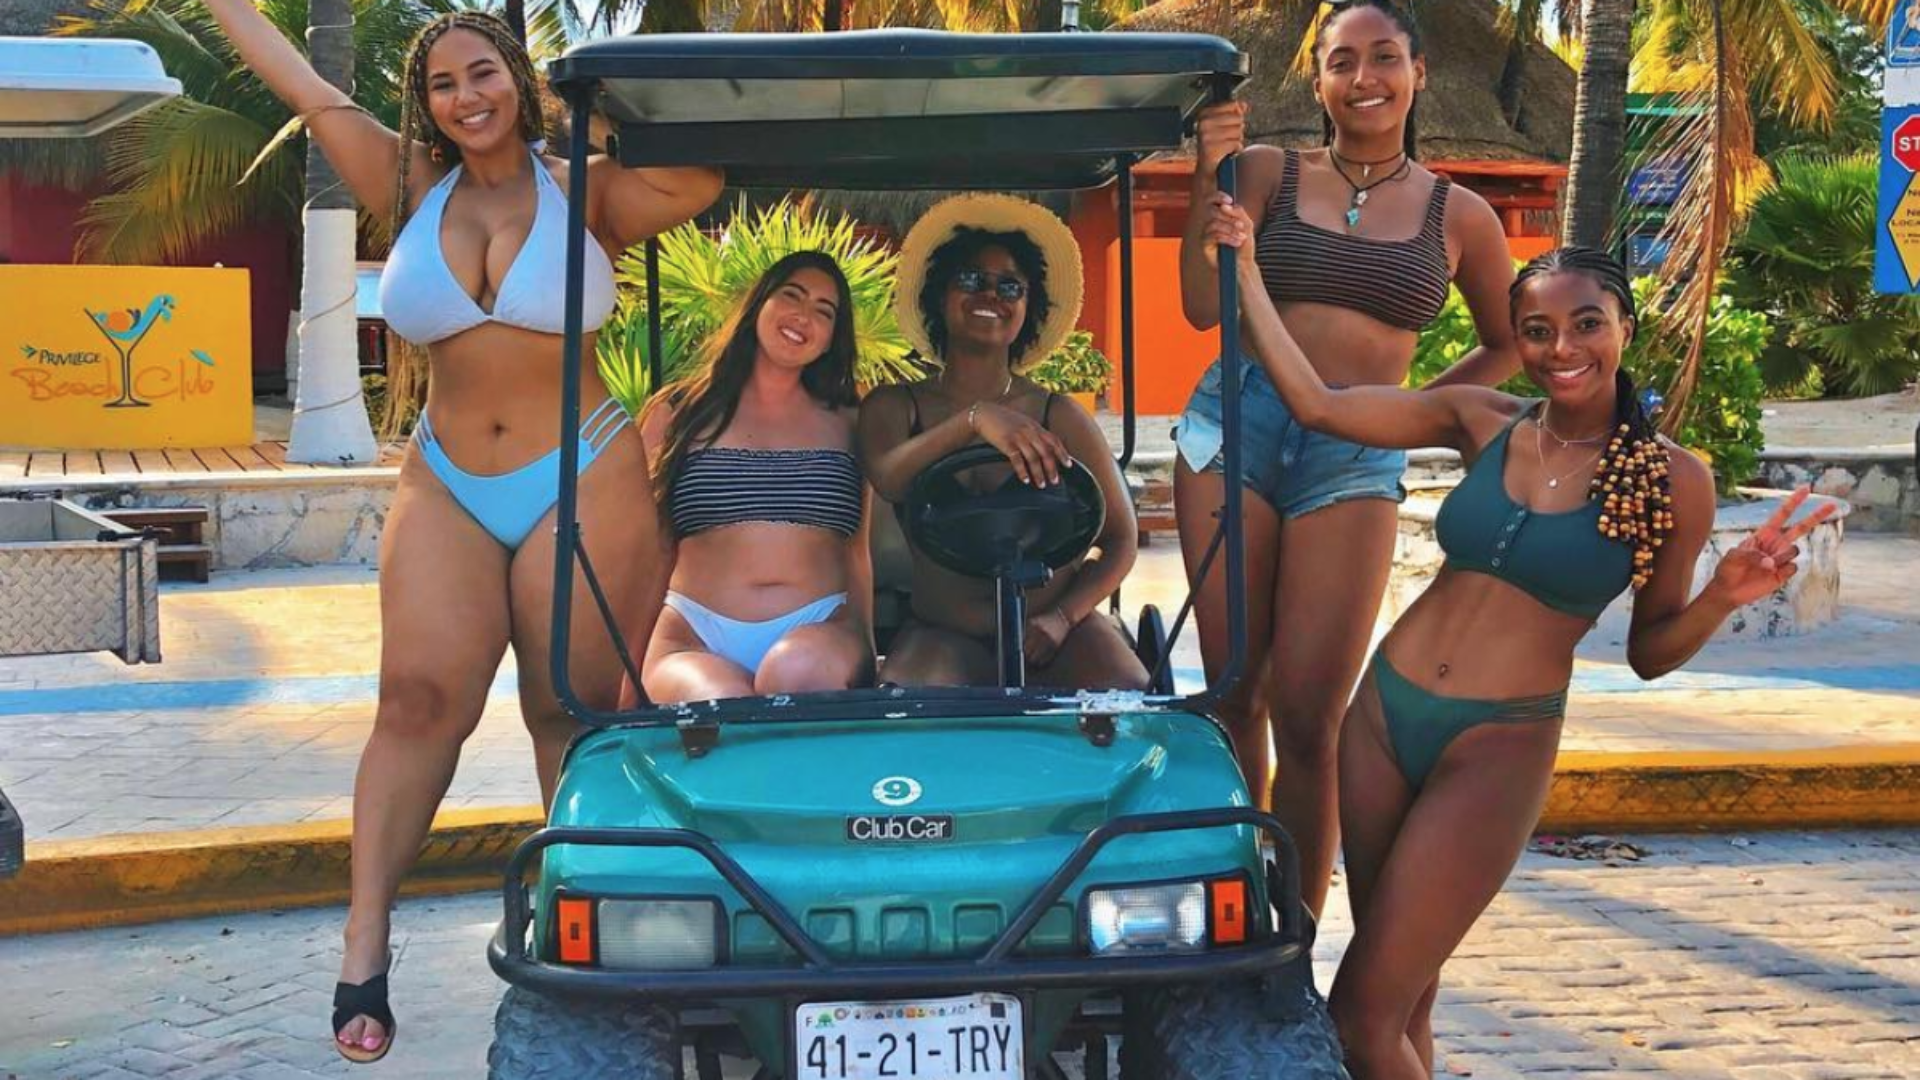 Black Travel Vibes: This Girl Squad's Cancun Trip Was A Whole Vibe